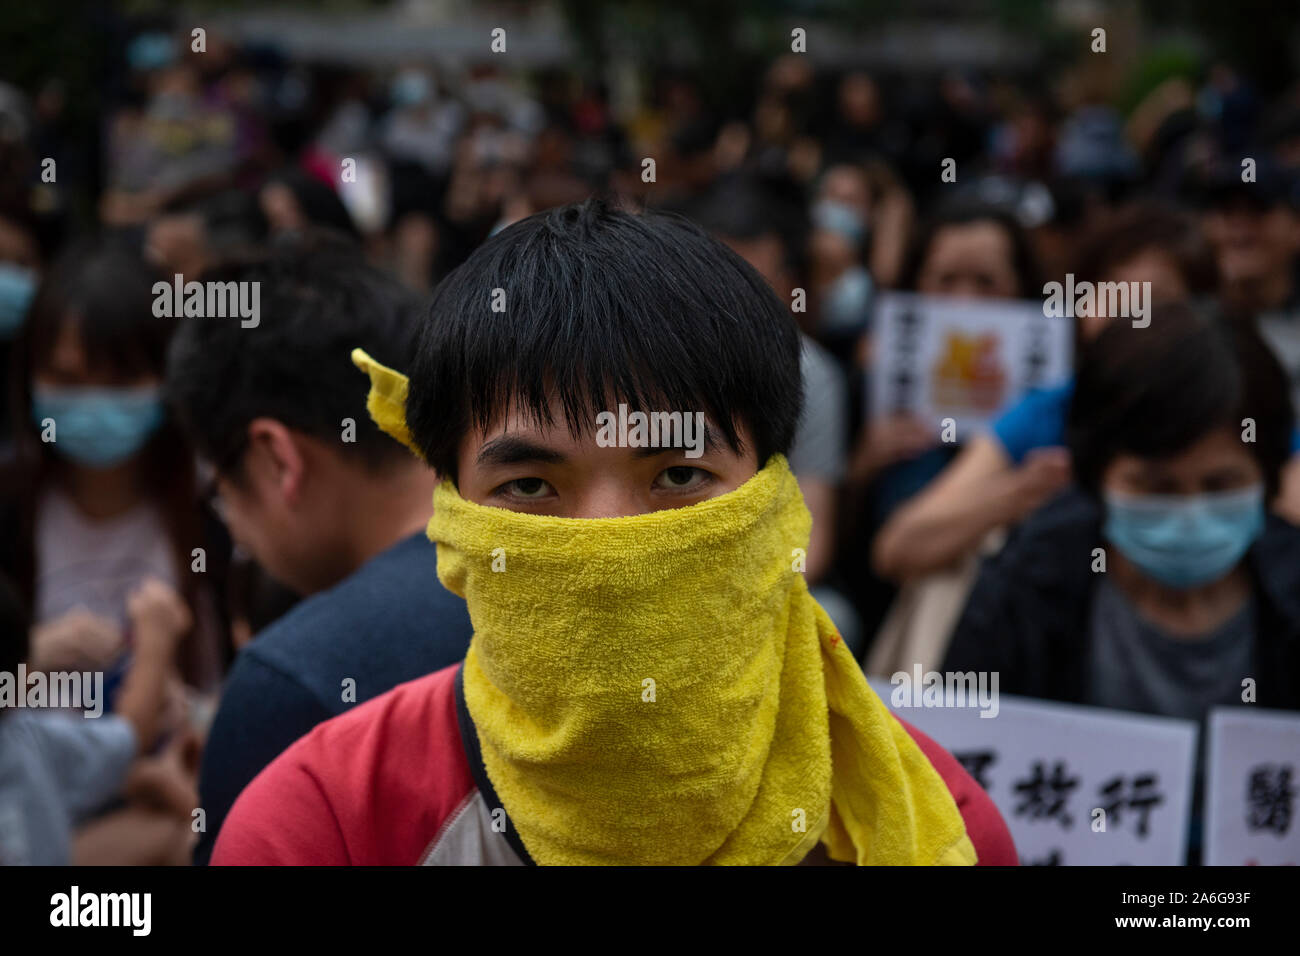 A pro-democracy protester with a yellow towel covering his face during an assembly of medical professionals in Central district in Hong Kong.Anti-government demonstrations in Hong Kong stretched into the fifth month as the controversial extradition bill was officially withdrawn on Wednesday while protesters continue to call for Hong Kong's Chief Executive Carrie Lam to meet their remaining demands, which includes an independent inquiry into police brutality, the retraction of the word 'riot' to describe the rallies, and genuine universal suffrage. Stock Photo